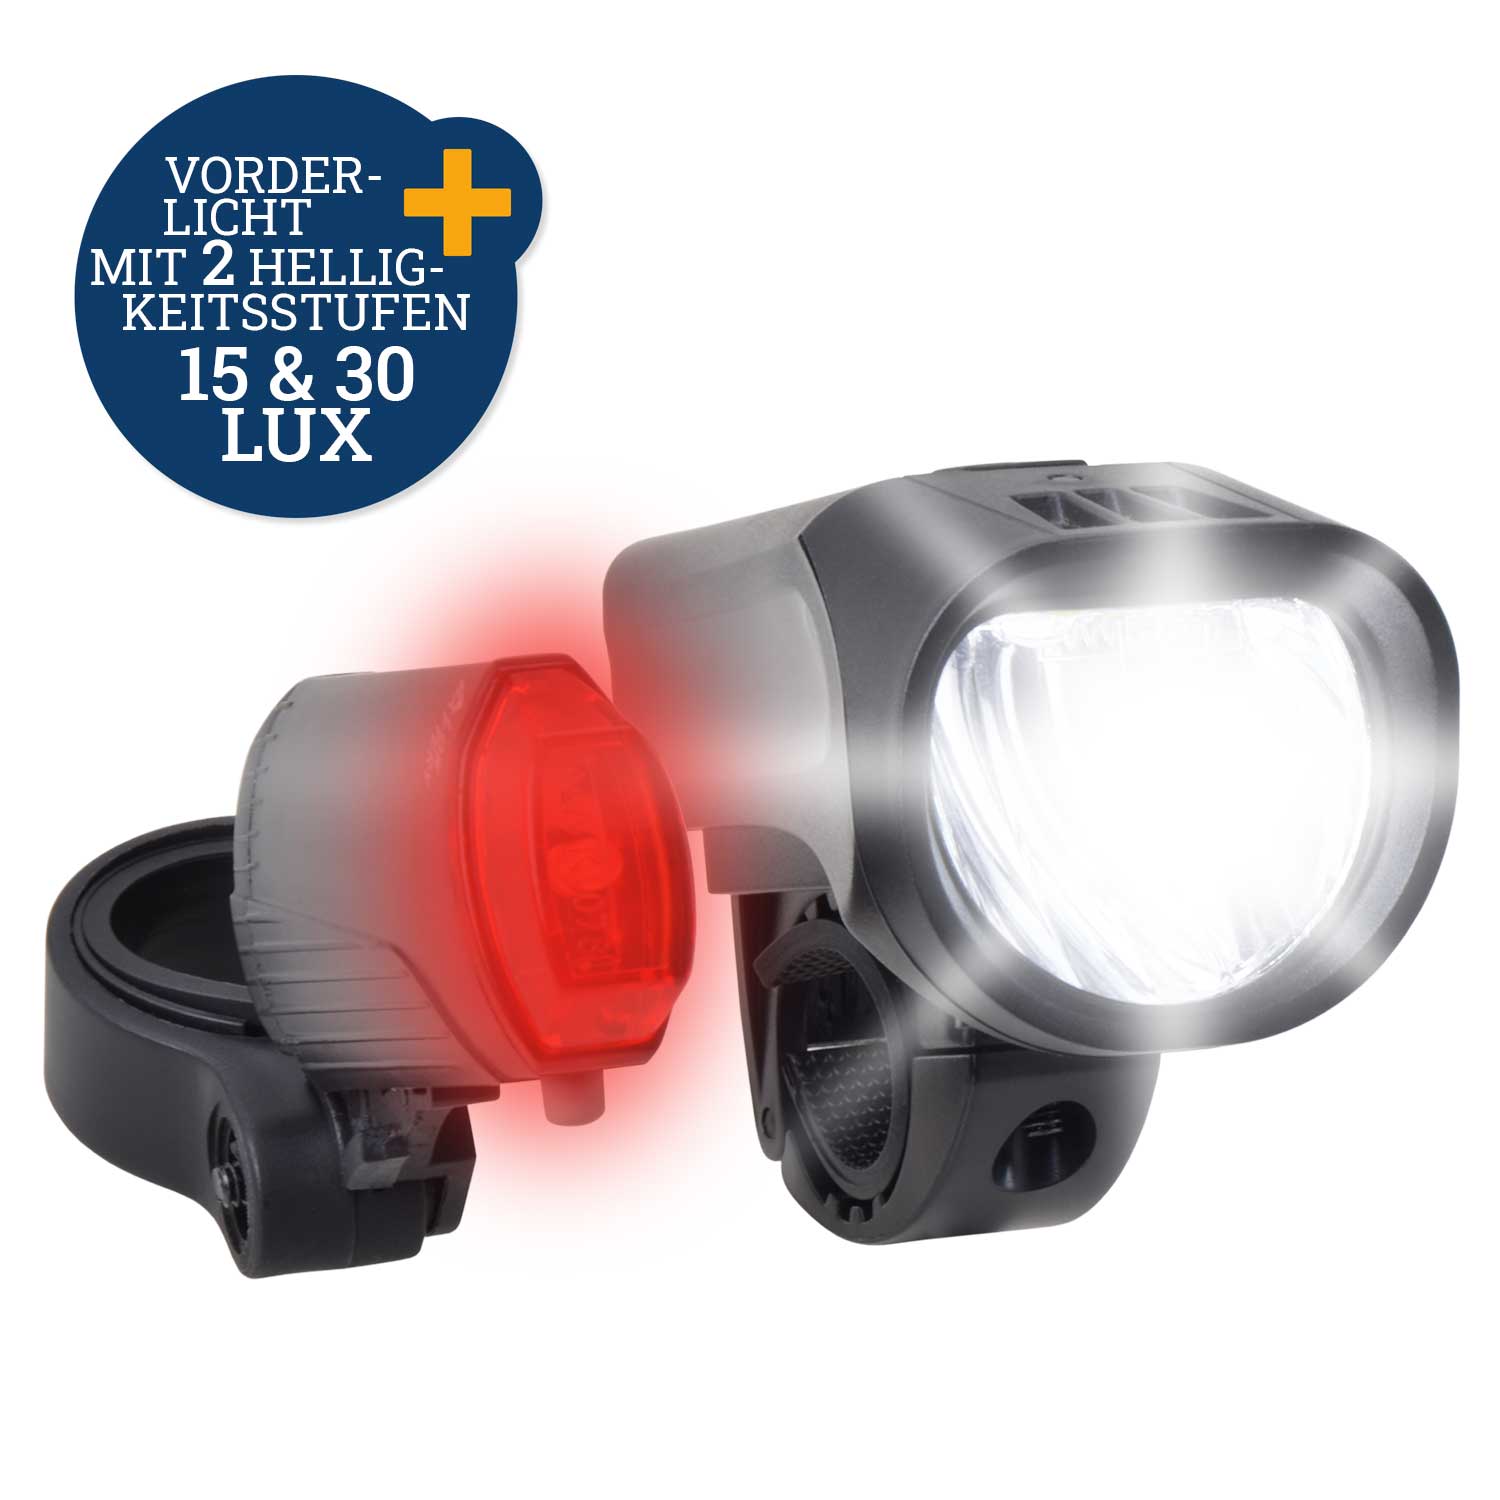 LED-Beleuchtungs-Set 30 LUX